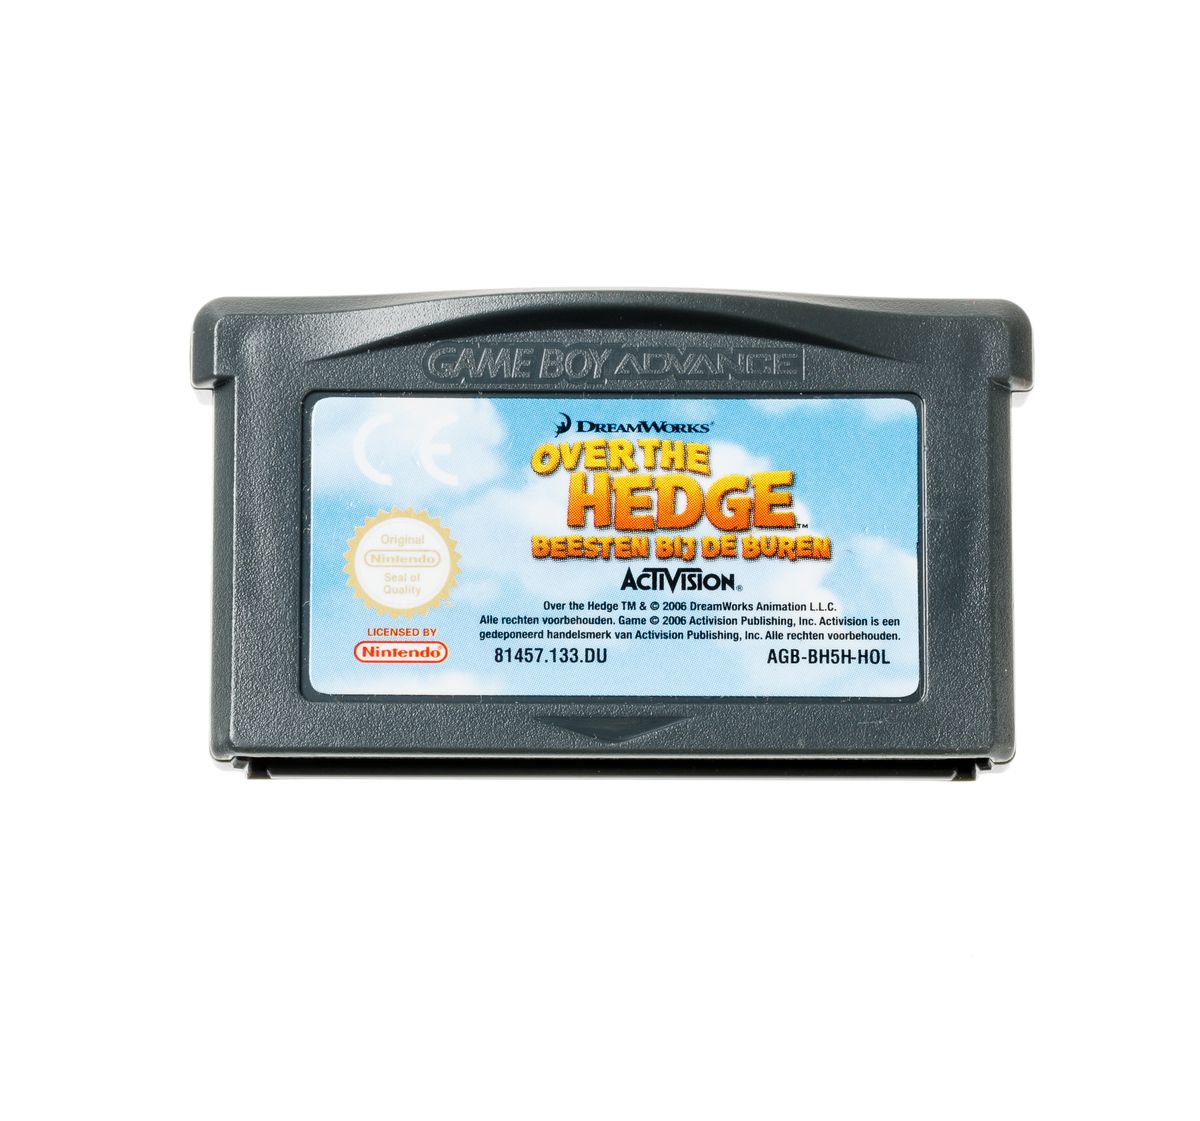 Over the Hedge - Gameboy Advance Games